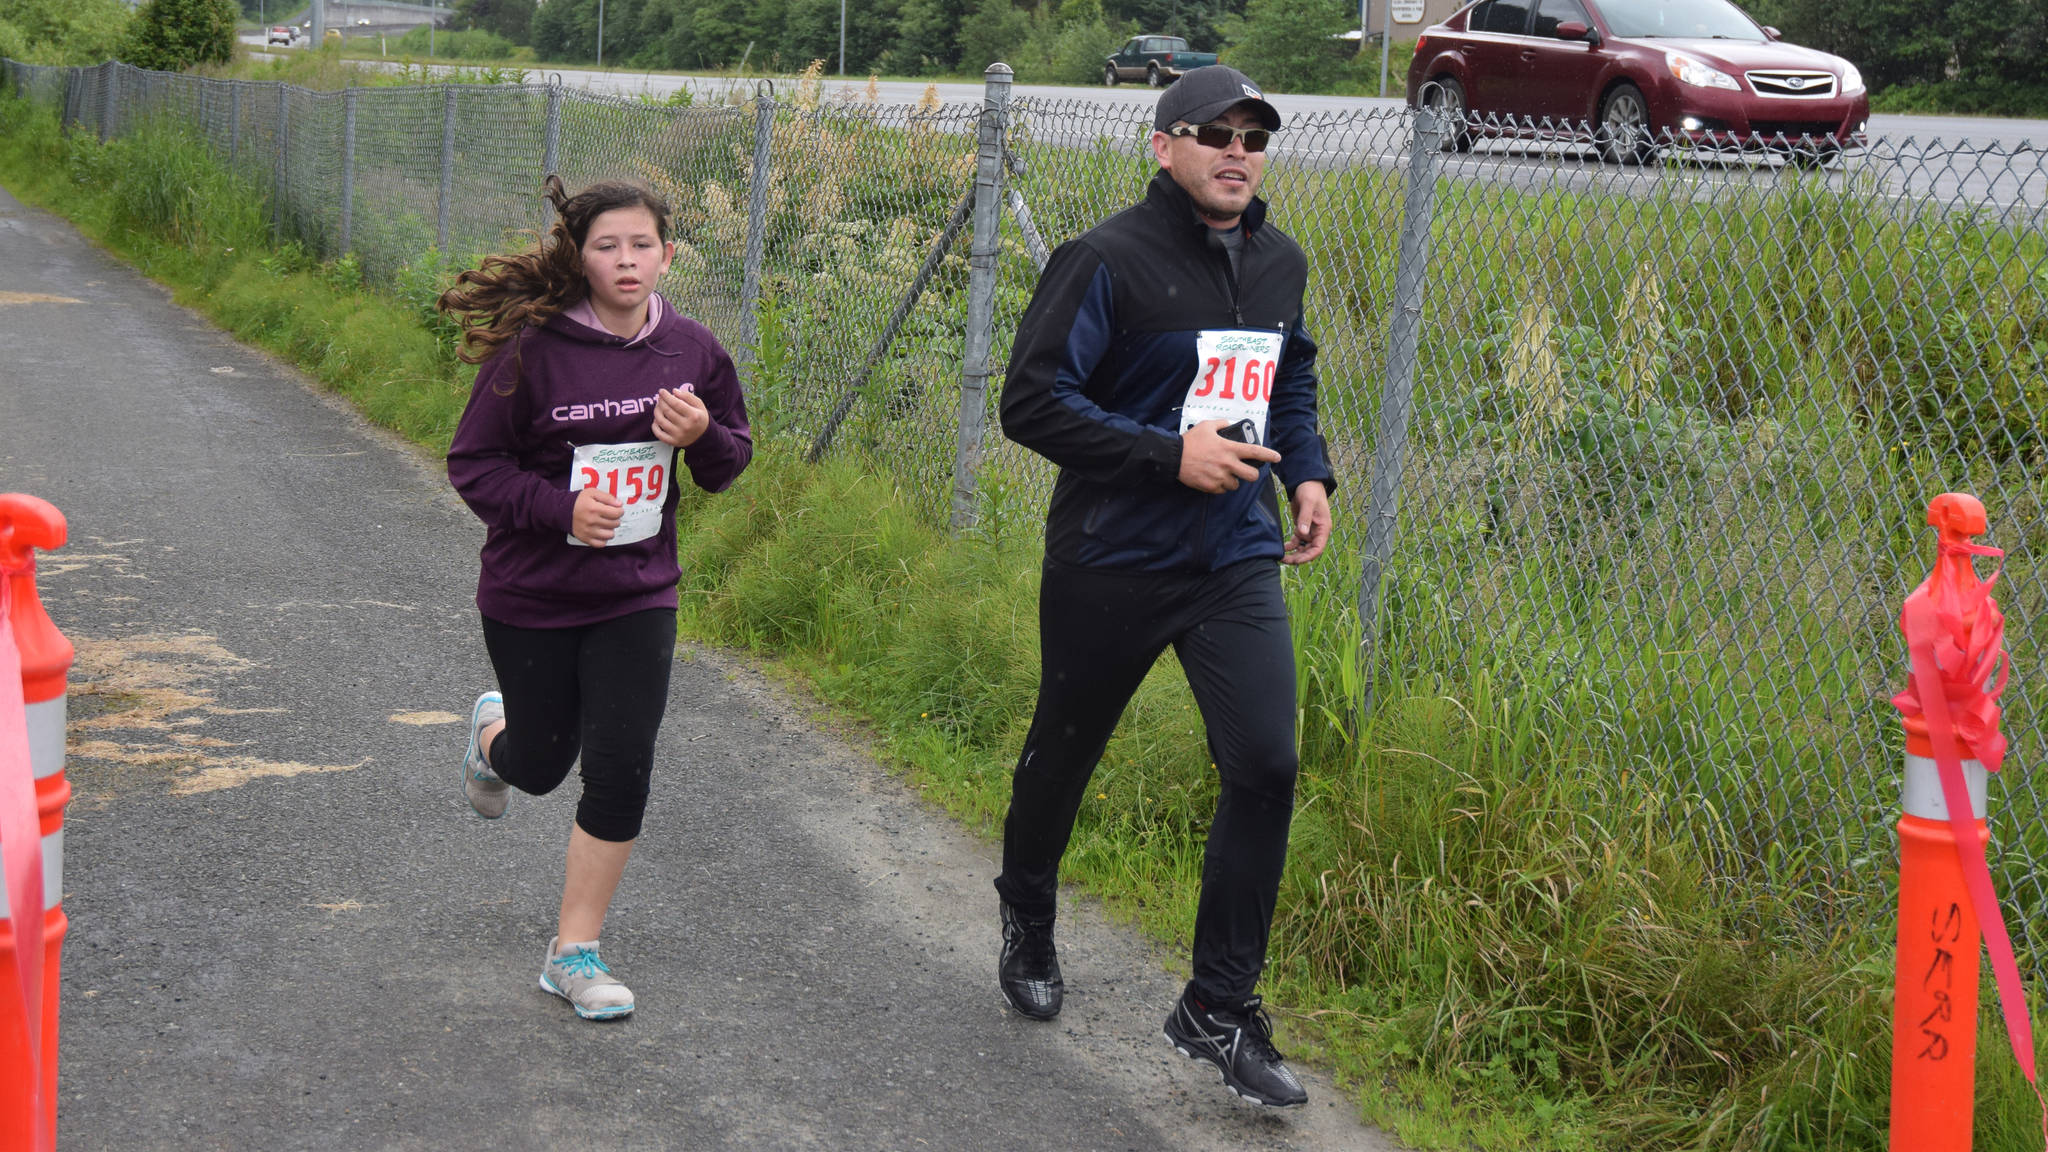 Ashlyn Lara, left, and Santiago Lara finish the McDowell Group Governor’s Cup 5K outside the Juneau Bone and Joint Center, Saturday, July 8, 2017. (Nolin Ainsworth | Juneau Empire)